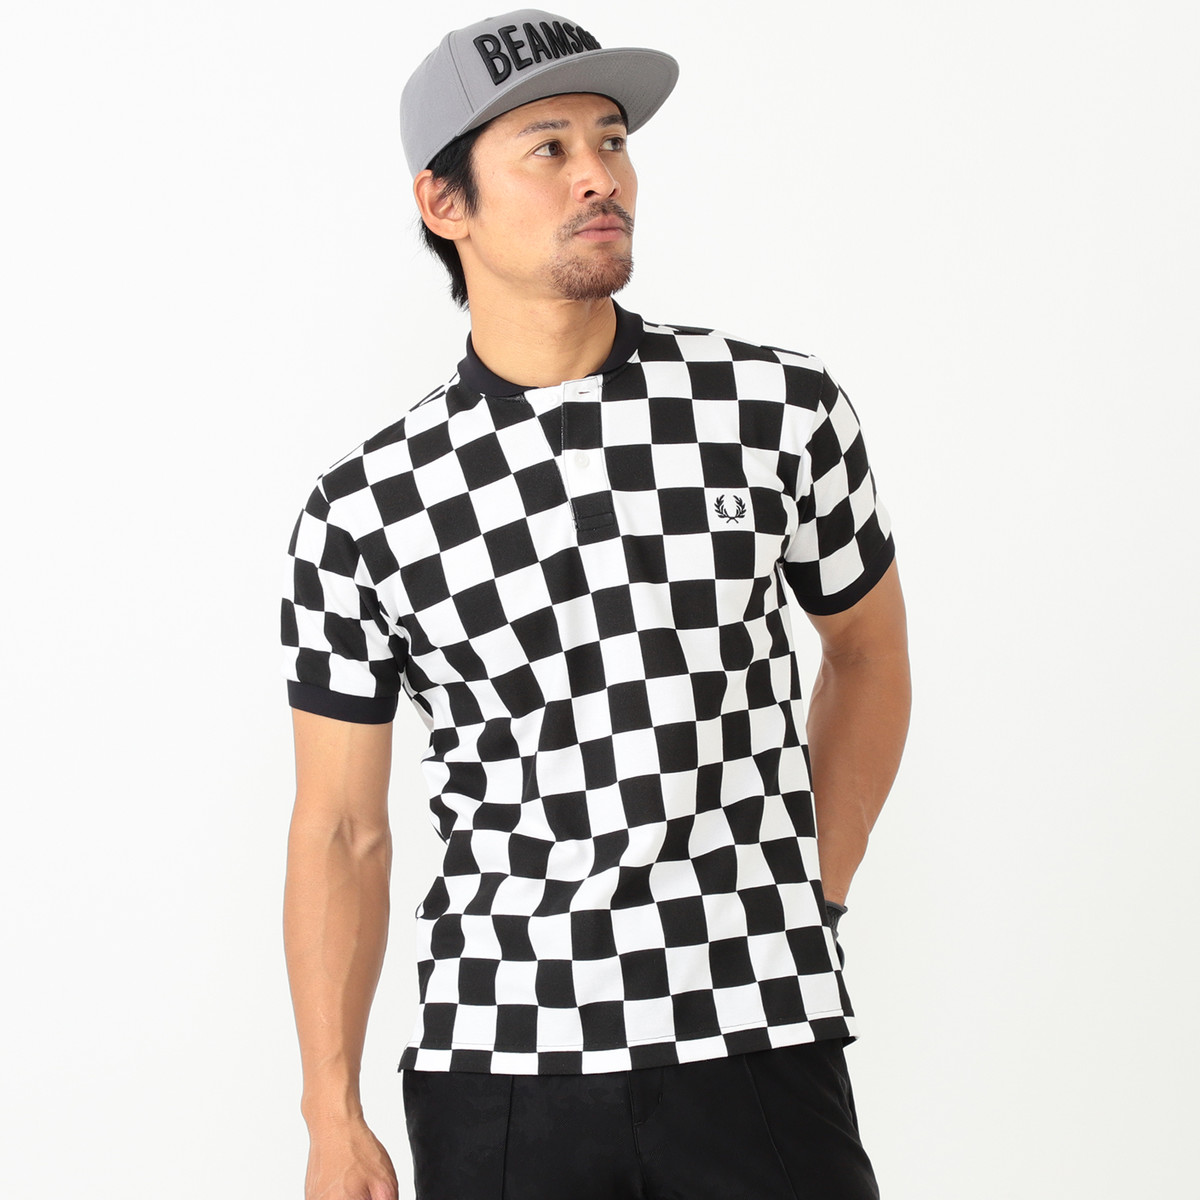  FRED PERRY×BEAMS GOLF 別注 チェッカーフラッグ柄 ポロシャツ 